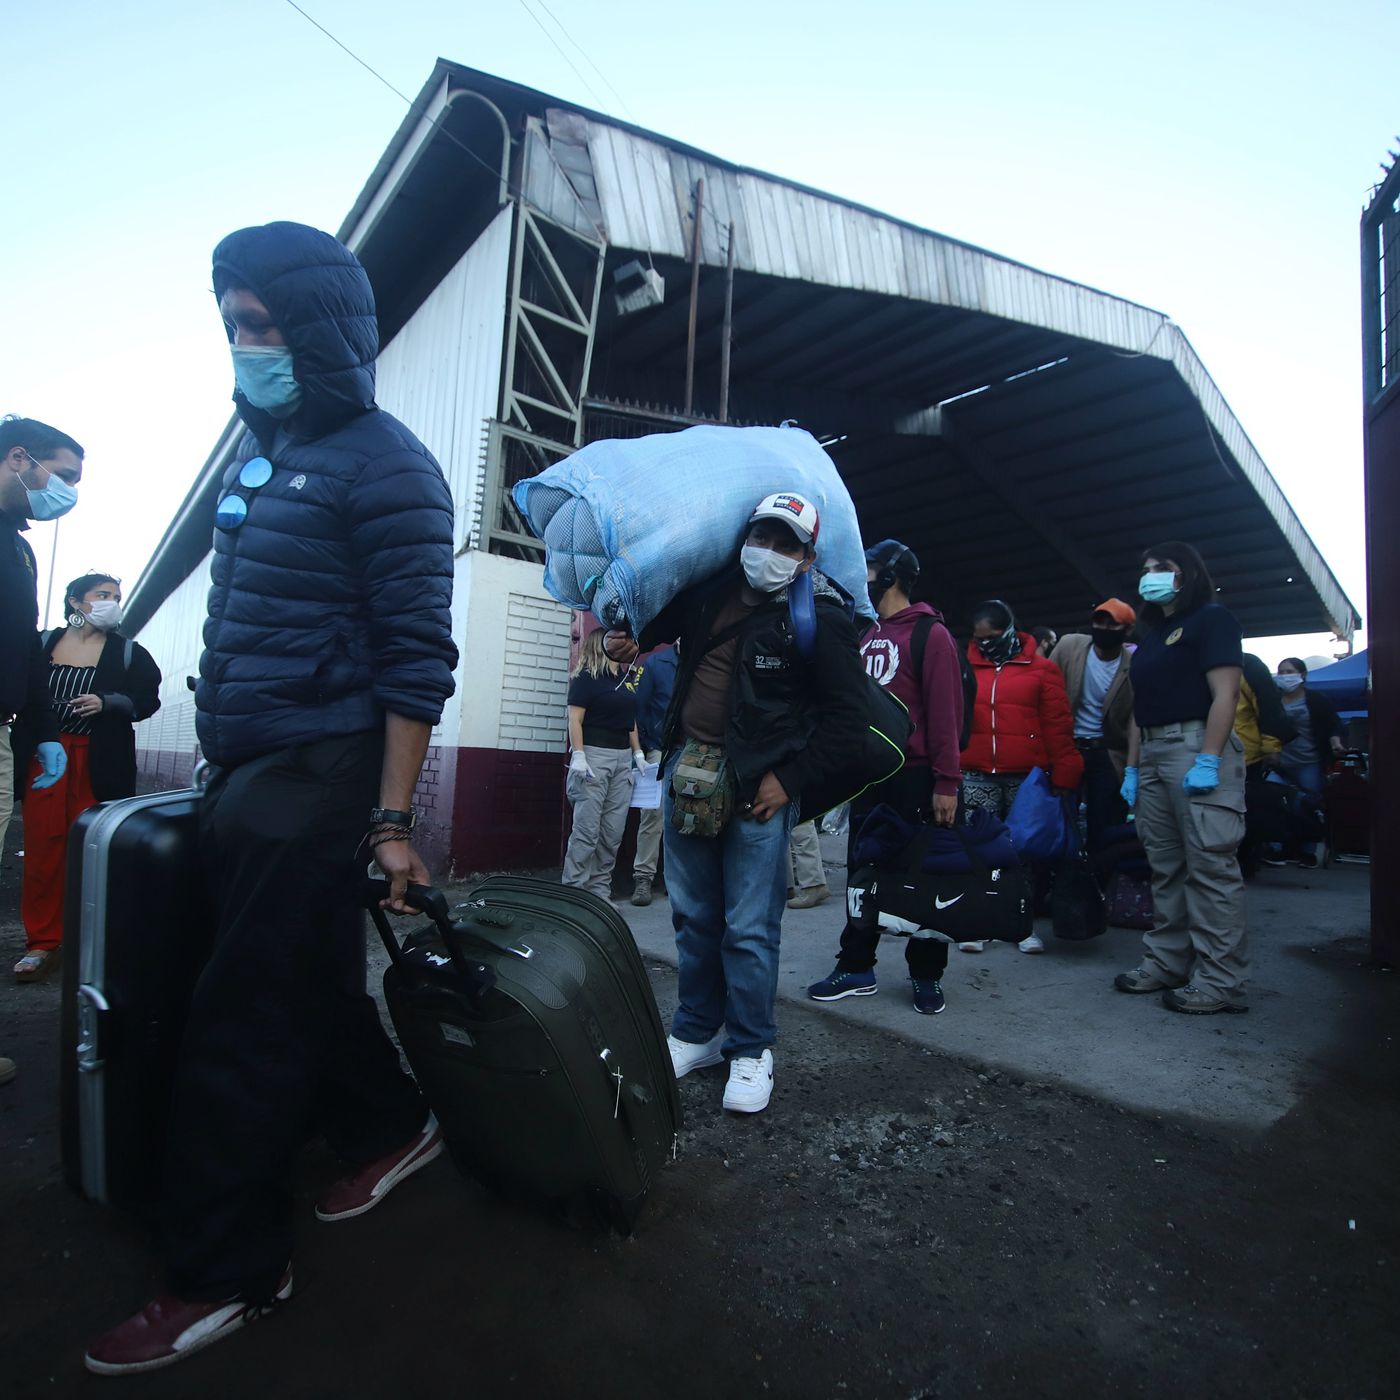 Bolivians stranded in Chile due to the novel coronavirus Covid-19 lockdown are taken to the Bolivian border to cross into their country, in Iquique, on April 20. Ignacio Muñoz/AFP via Getty Images